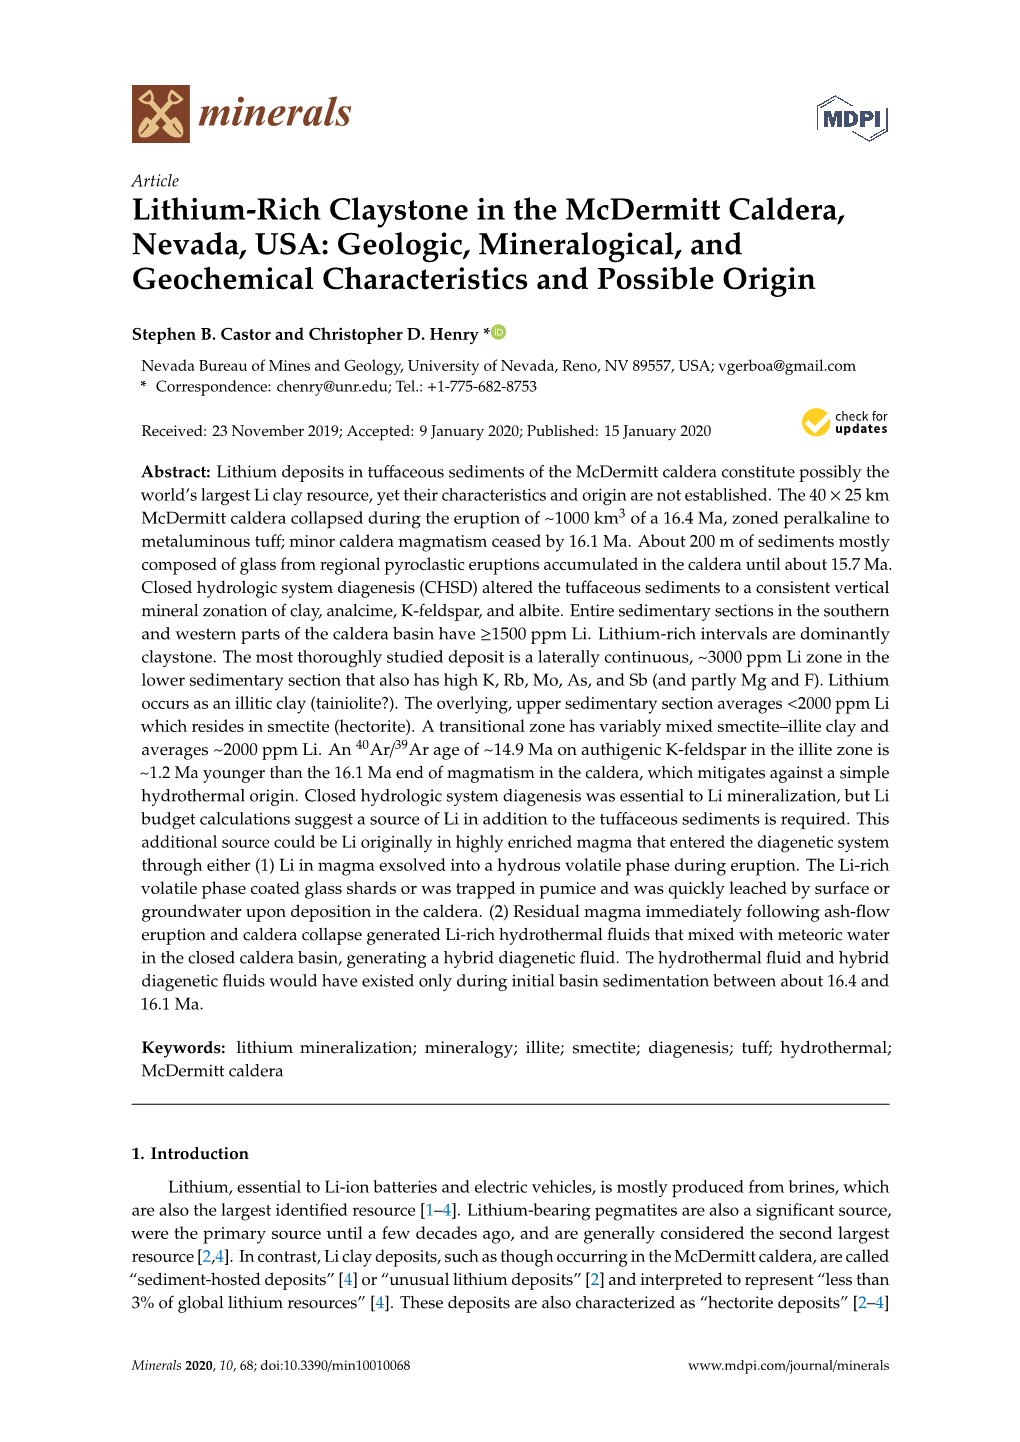 Lithium-Rich Claystone in the Mcdermitt Caldera, Nevada, USA: Geologic, Mineralogical, and Geochemical Characteristics and Possible Origin